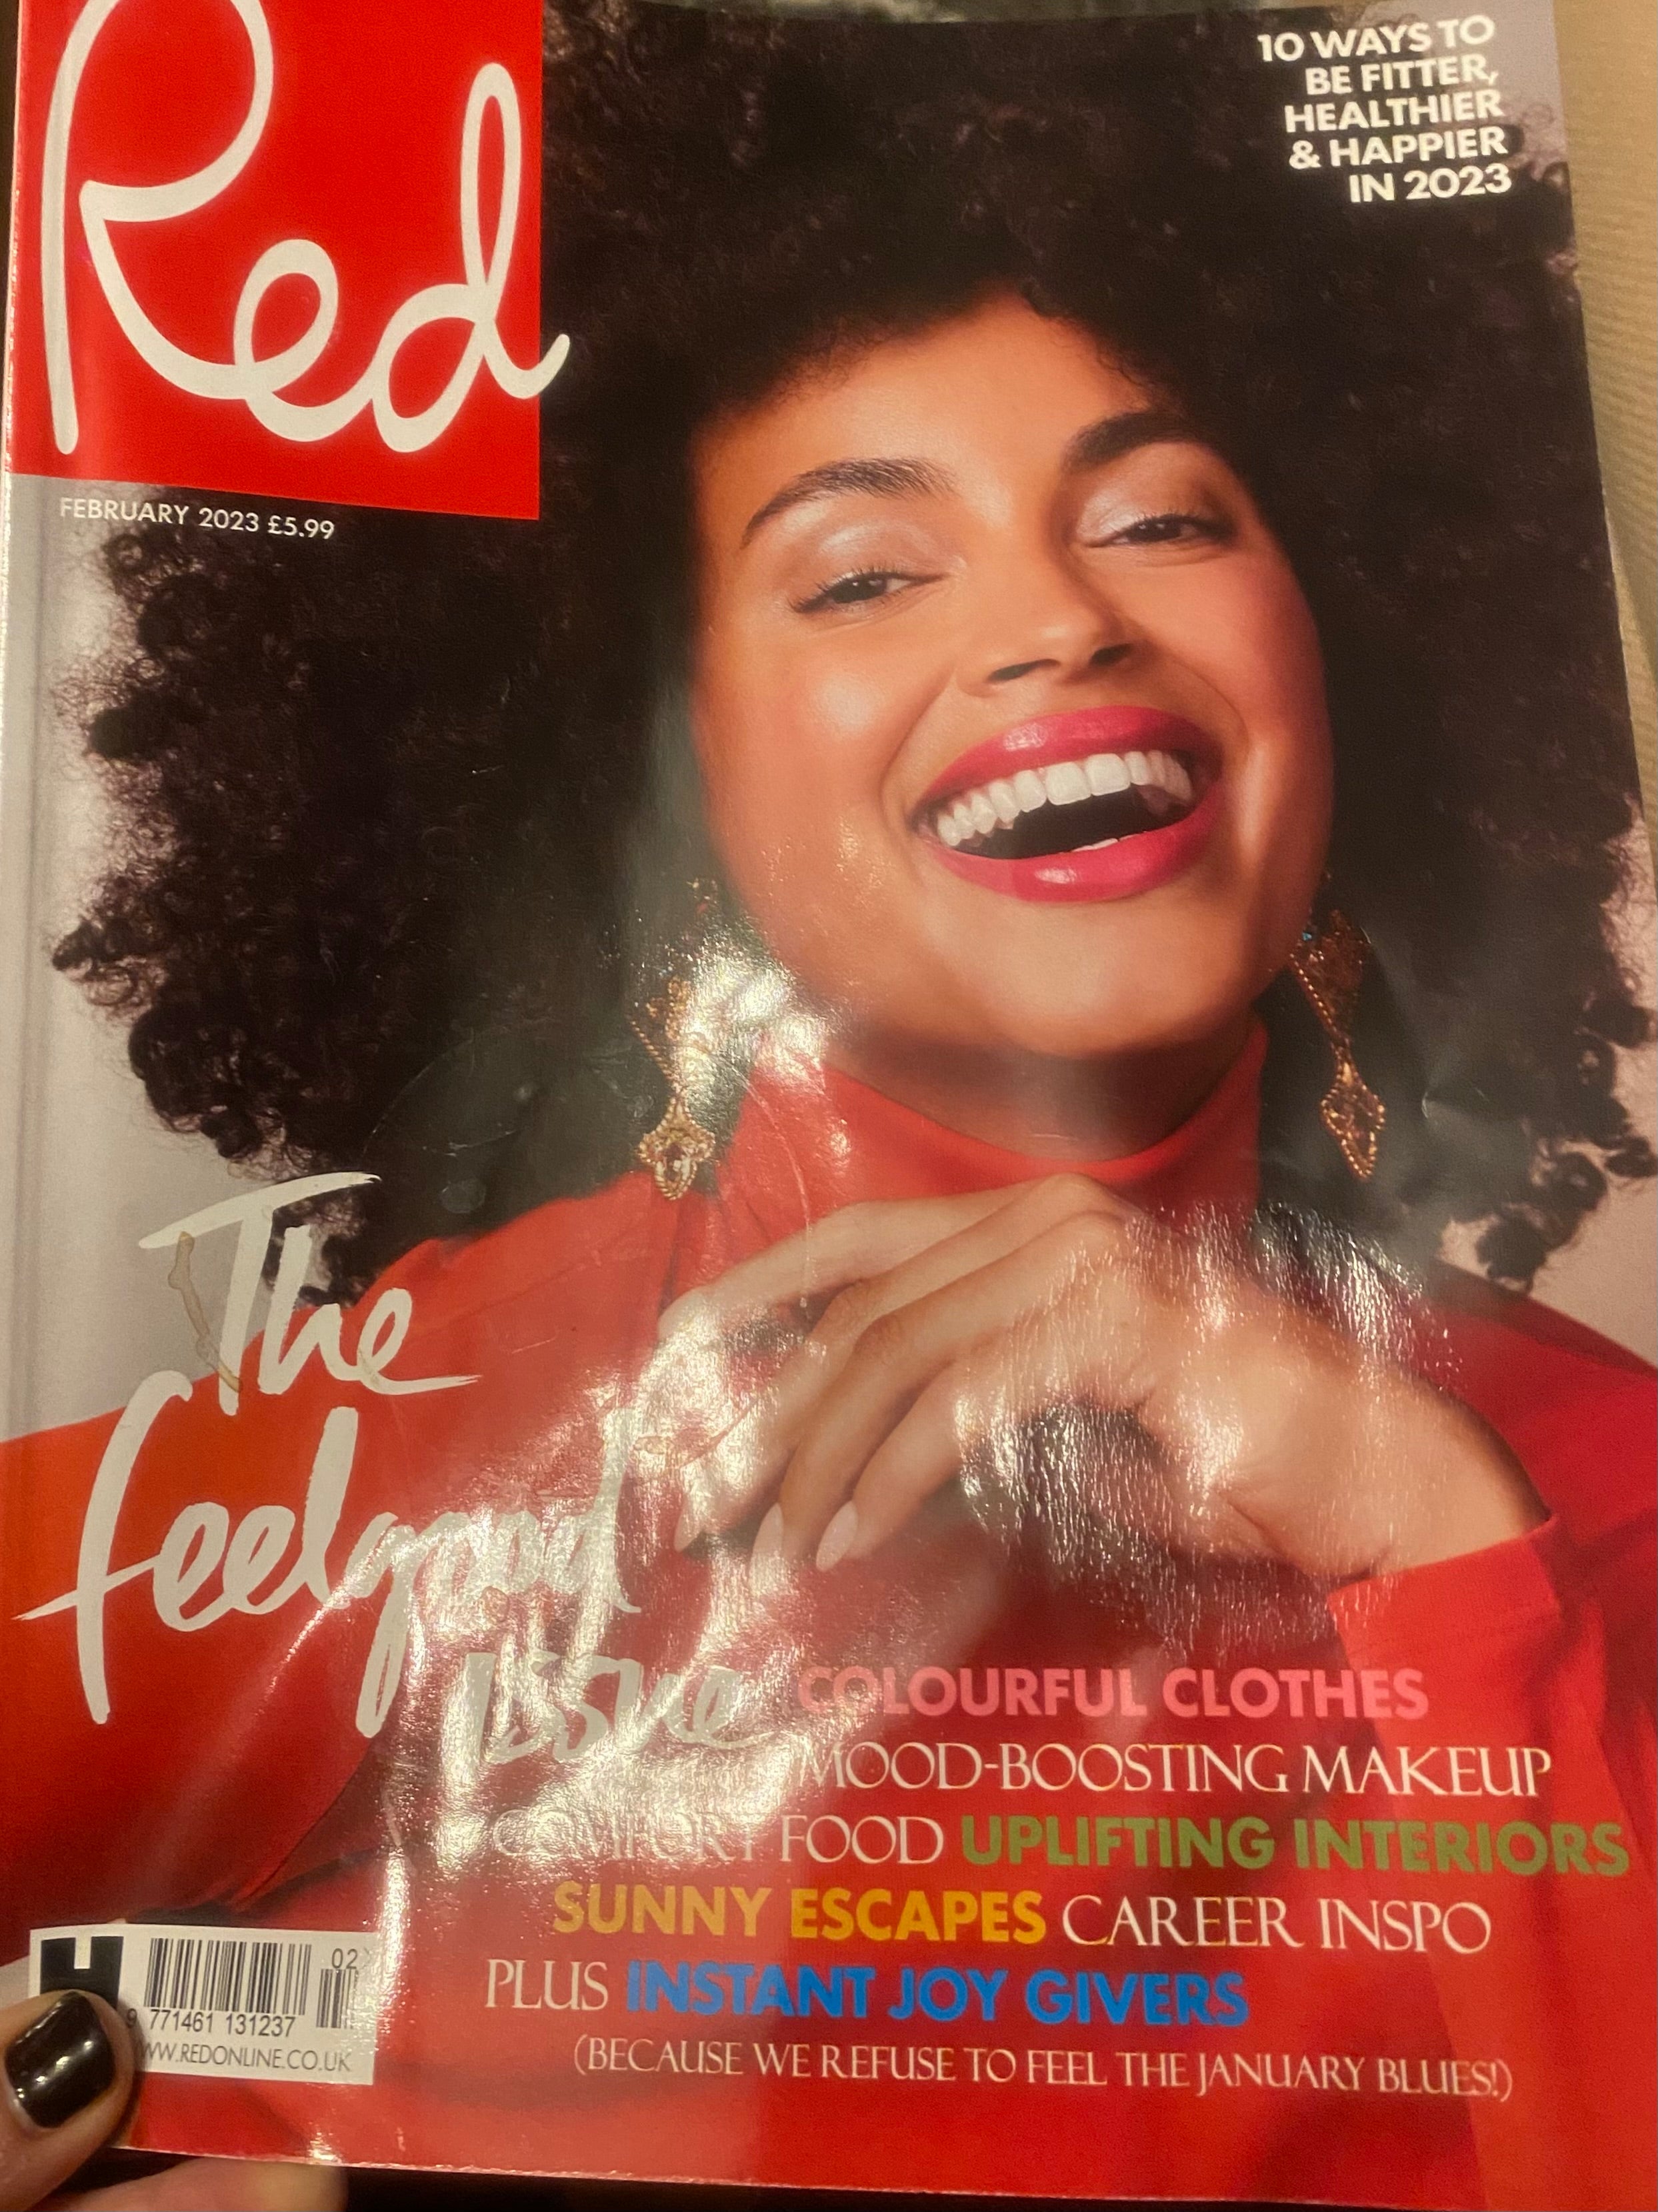 Red Magazine feature our Grace Heart Hoops